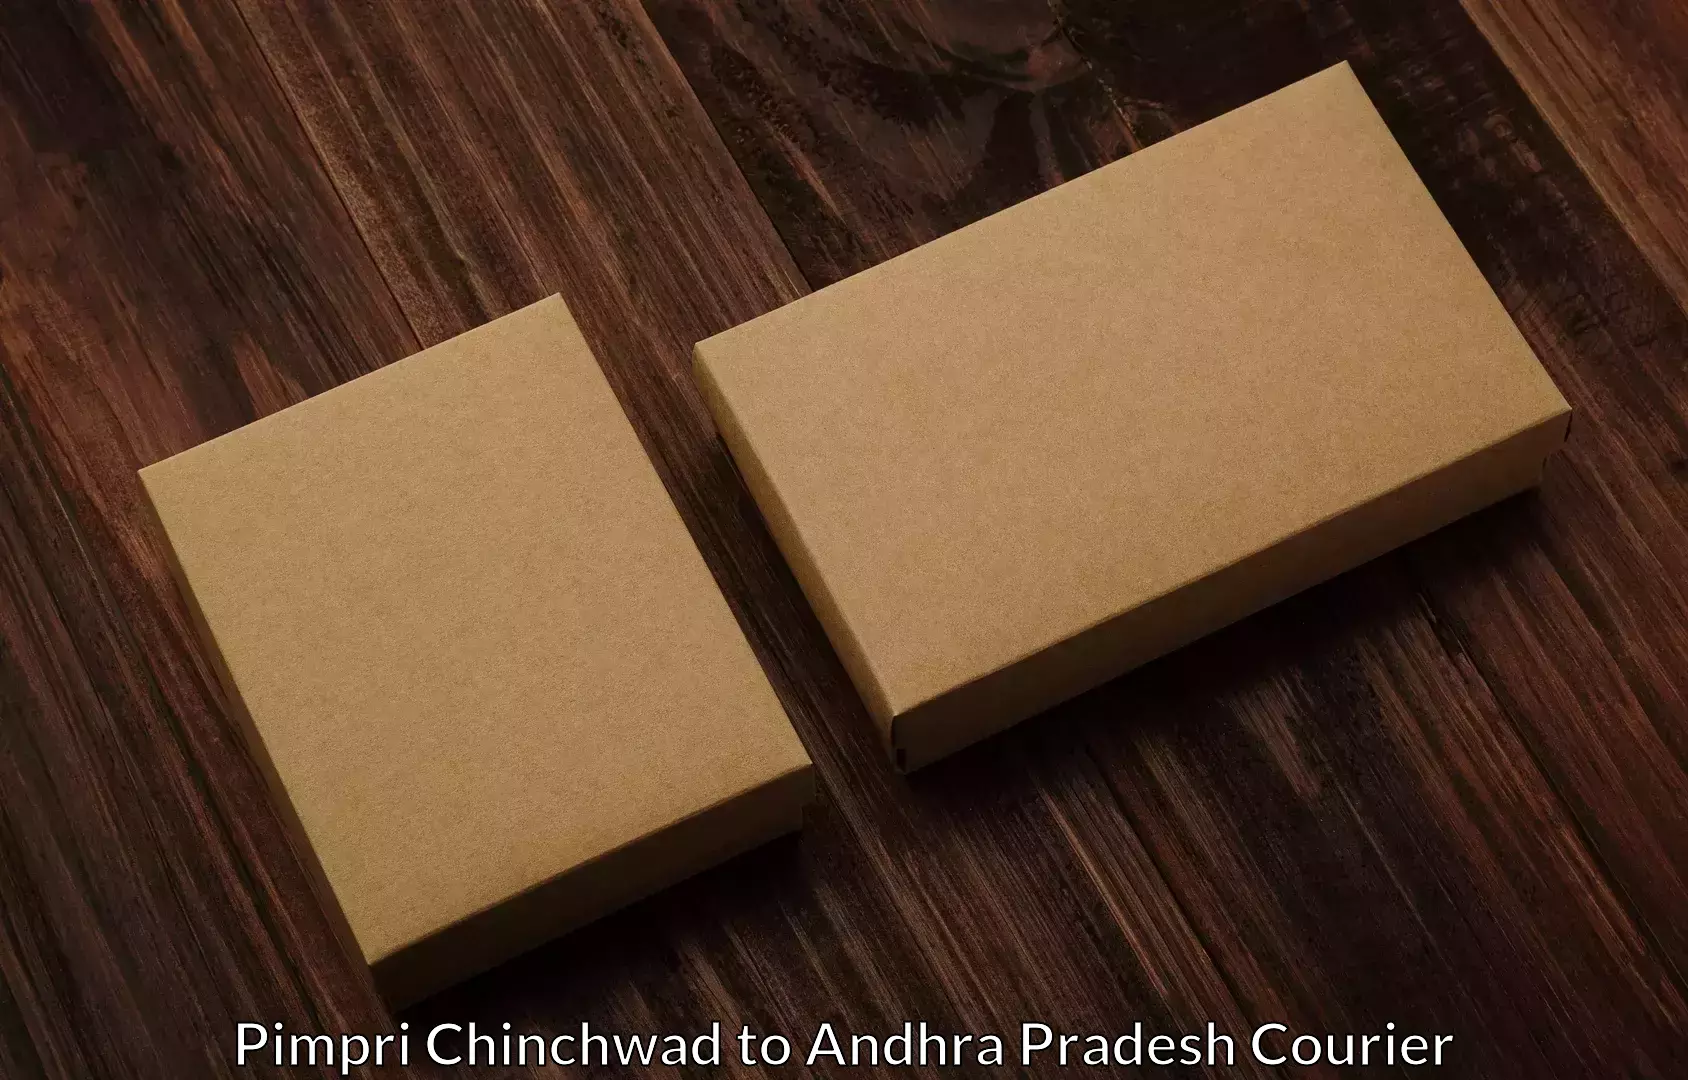 Trusted relocation experts Pimpri Chinchwad to Mantada